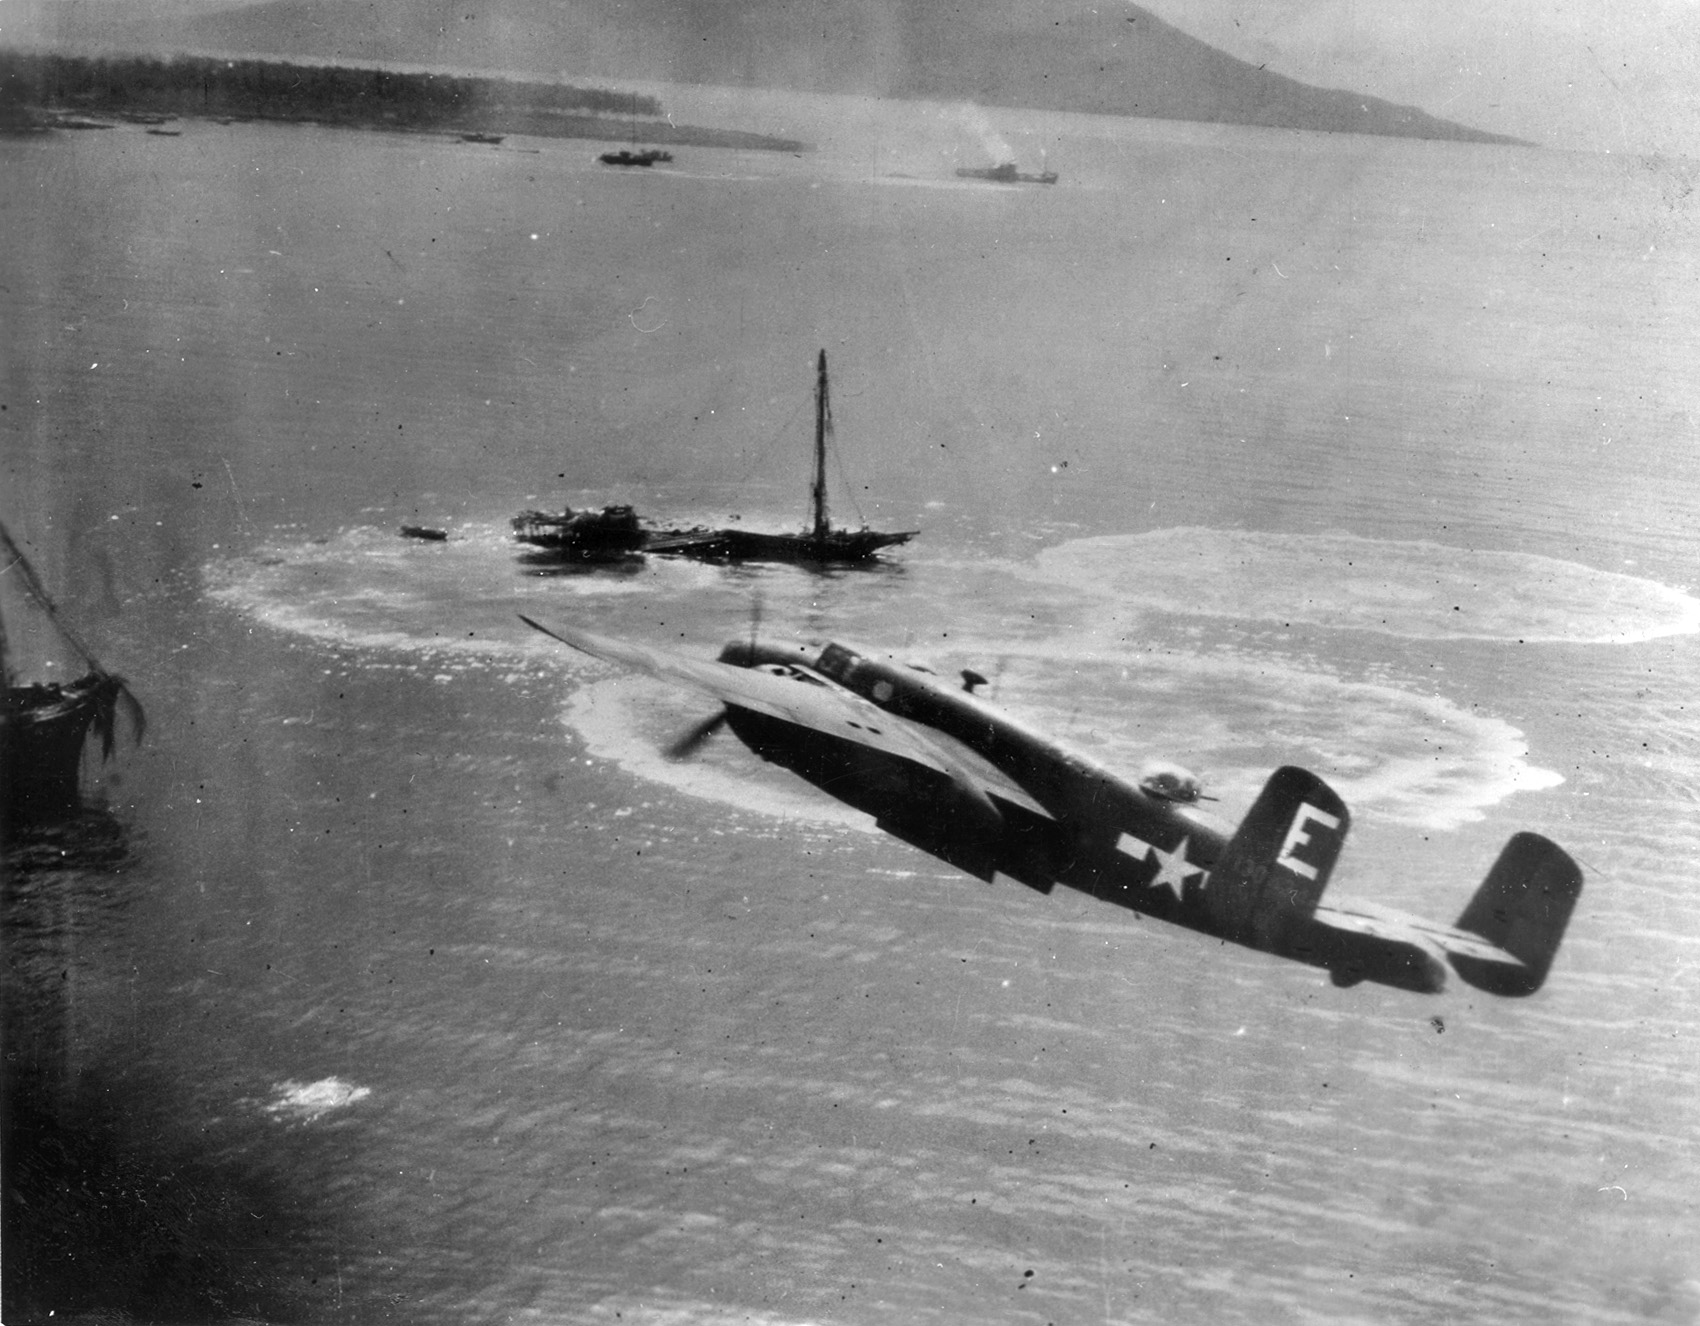 A B-25 Mitchell medium bomber banks toward a stricken Japanese vessel that is already sinking as lifeboats are visible pulling away. B-25s conducted numerous raids on Japanese shipping and shore installations in the South Pacific, often with spectacular results.